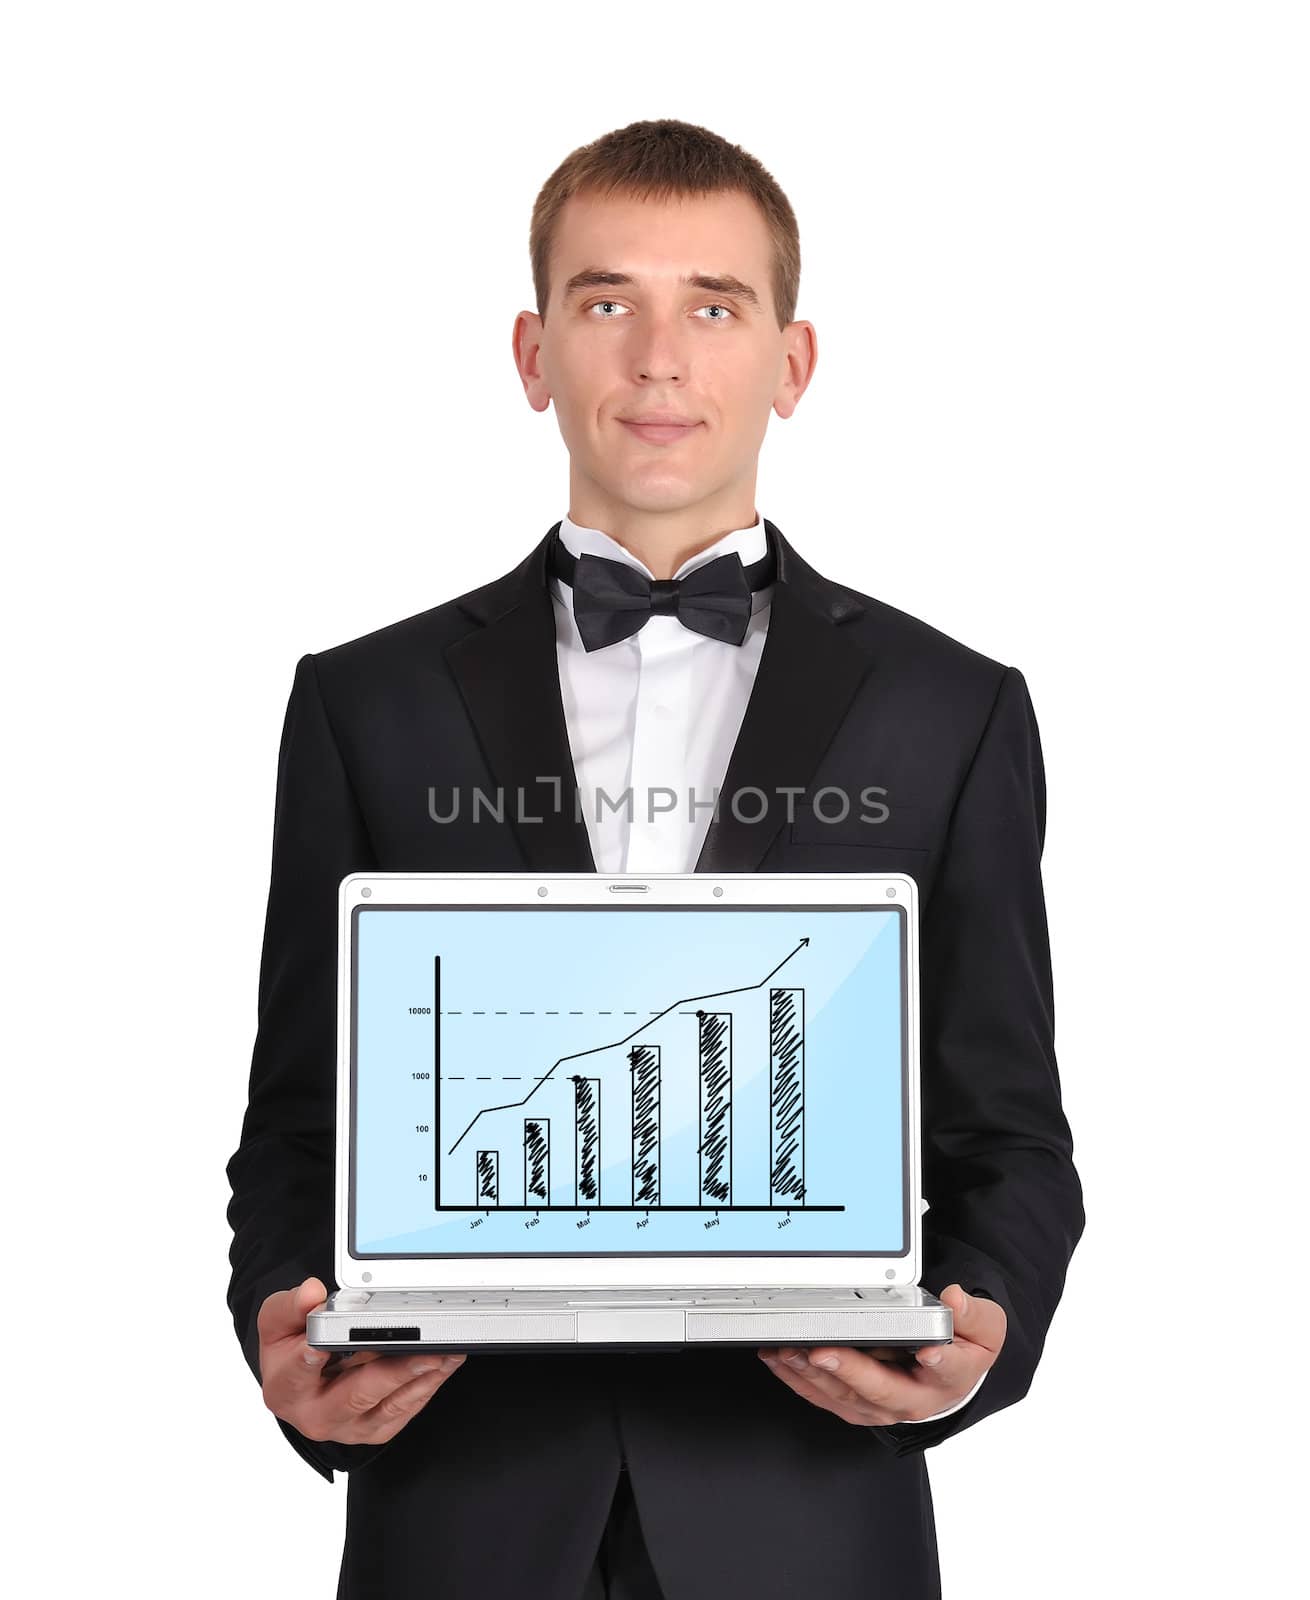 businessman in  tuxedo holding laptop wirth business chart